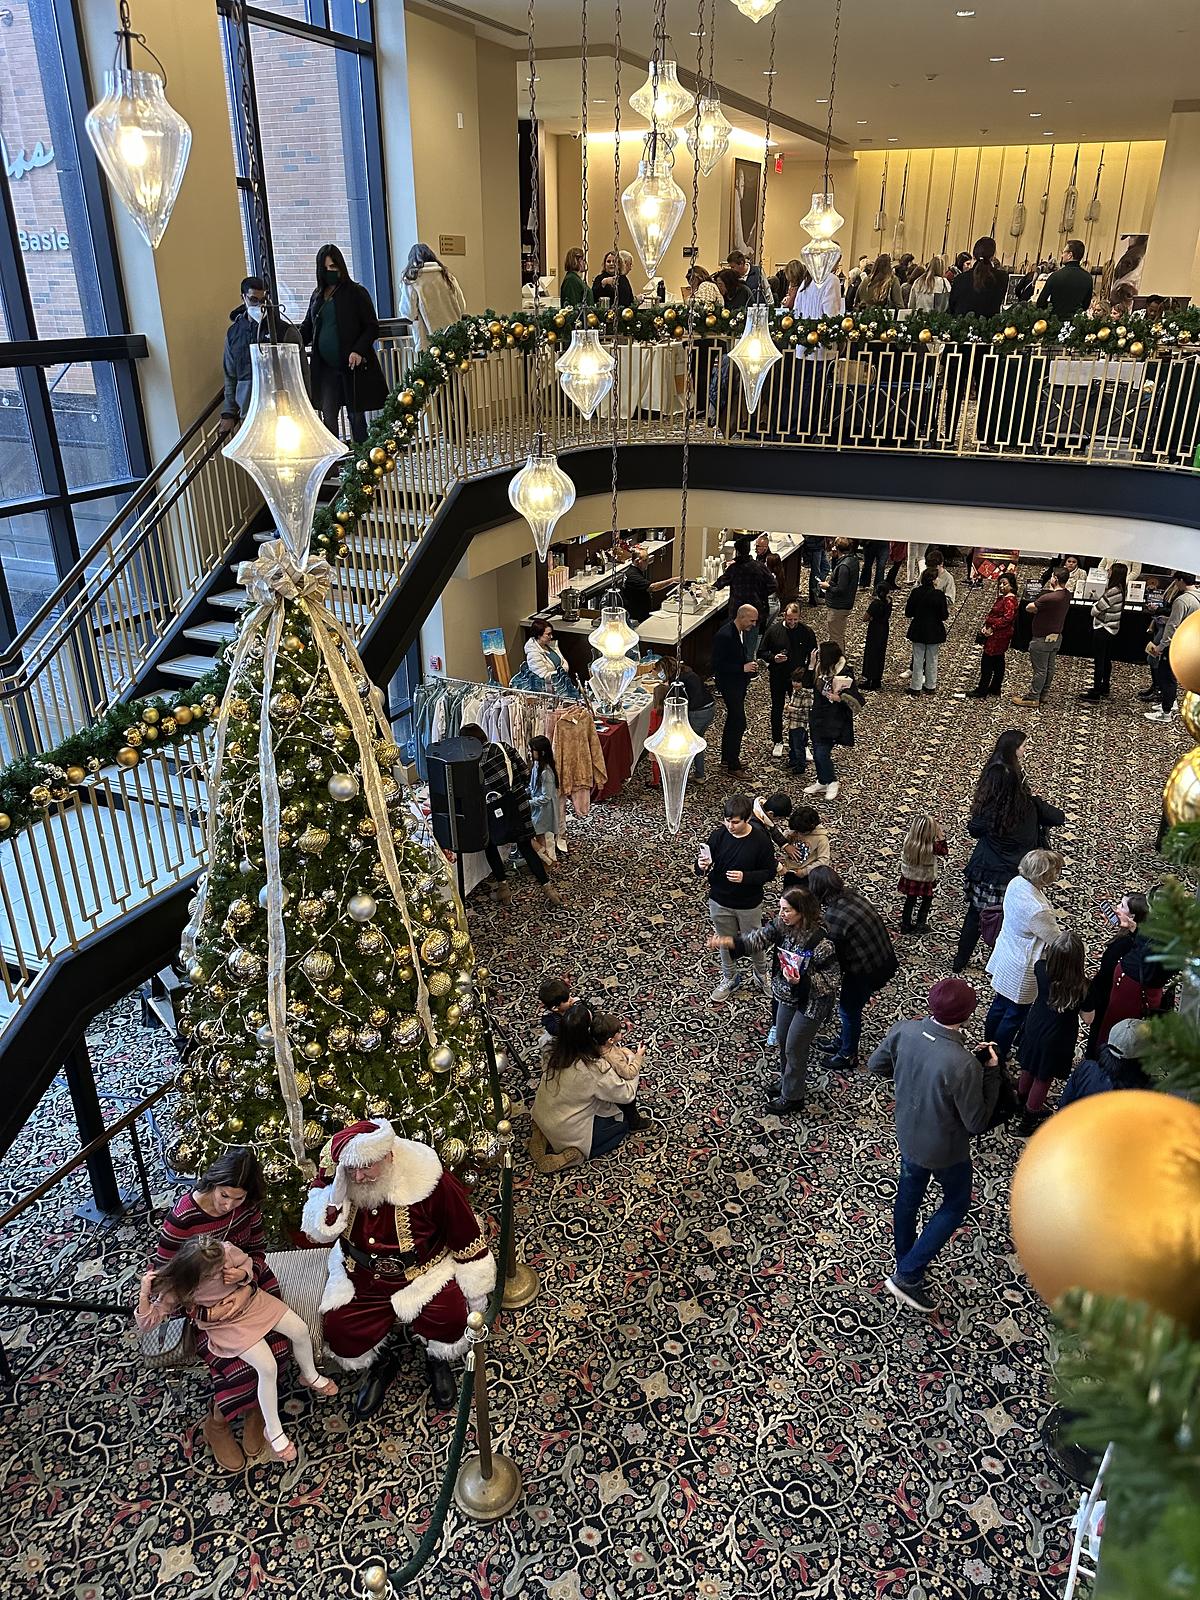 2023 Holiday Pop-Up Weekend at The Basie Center Image